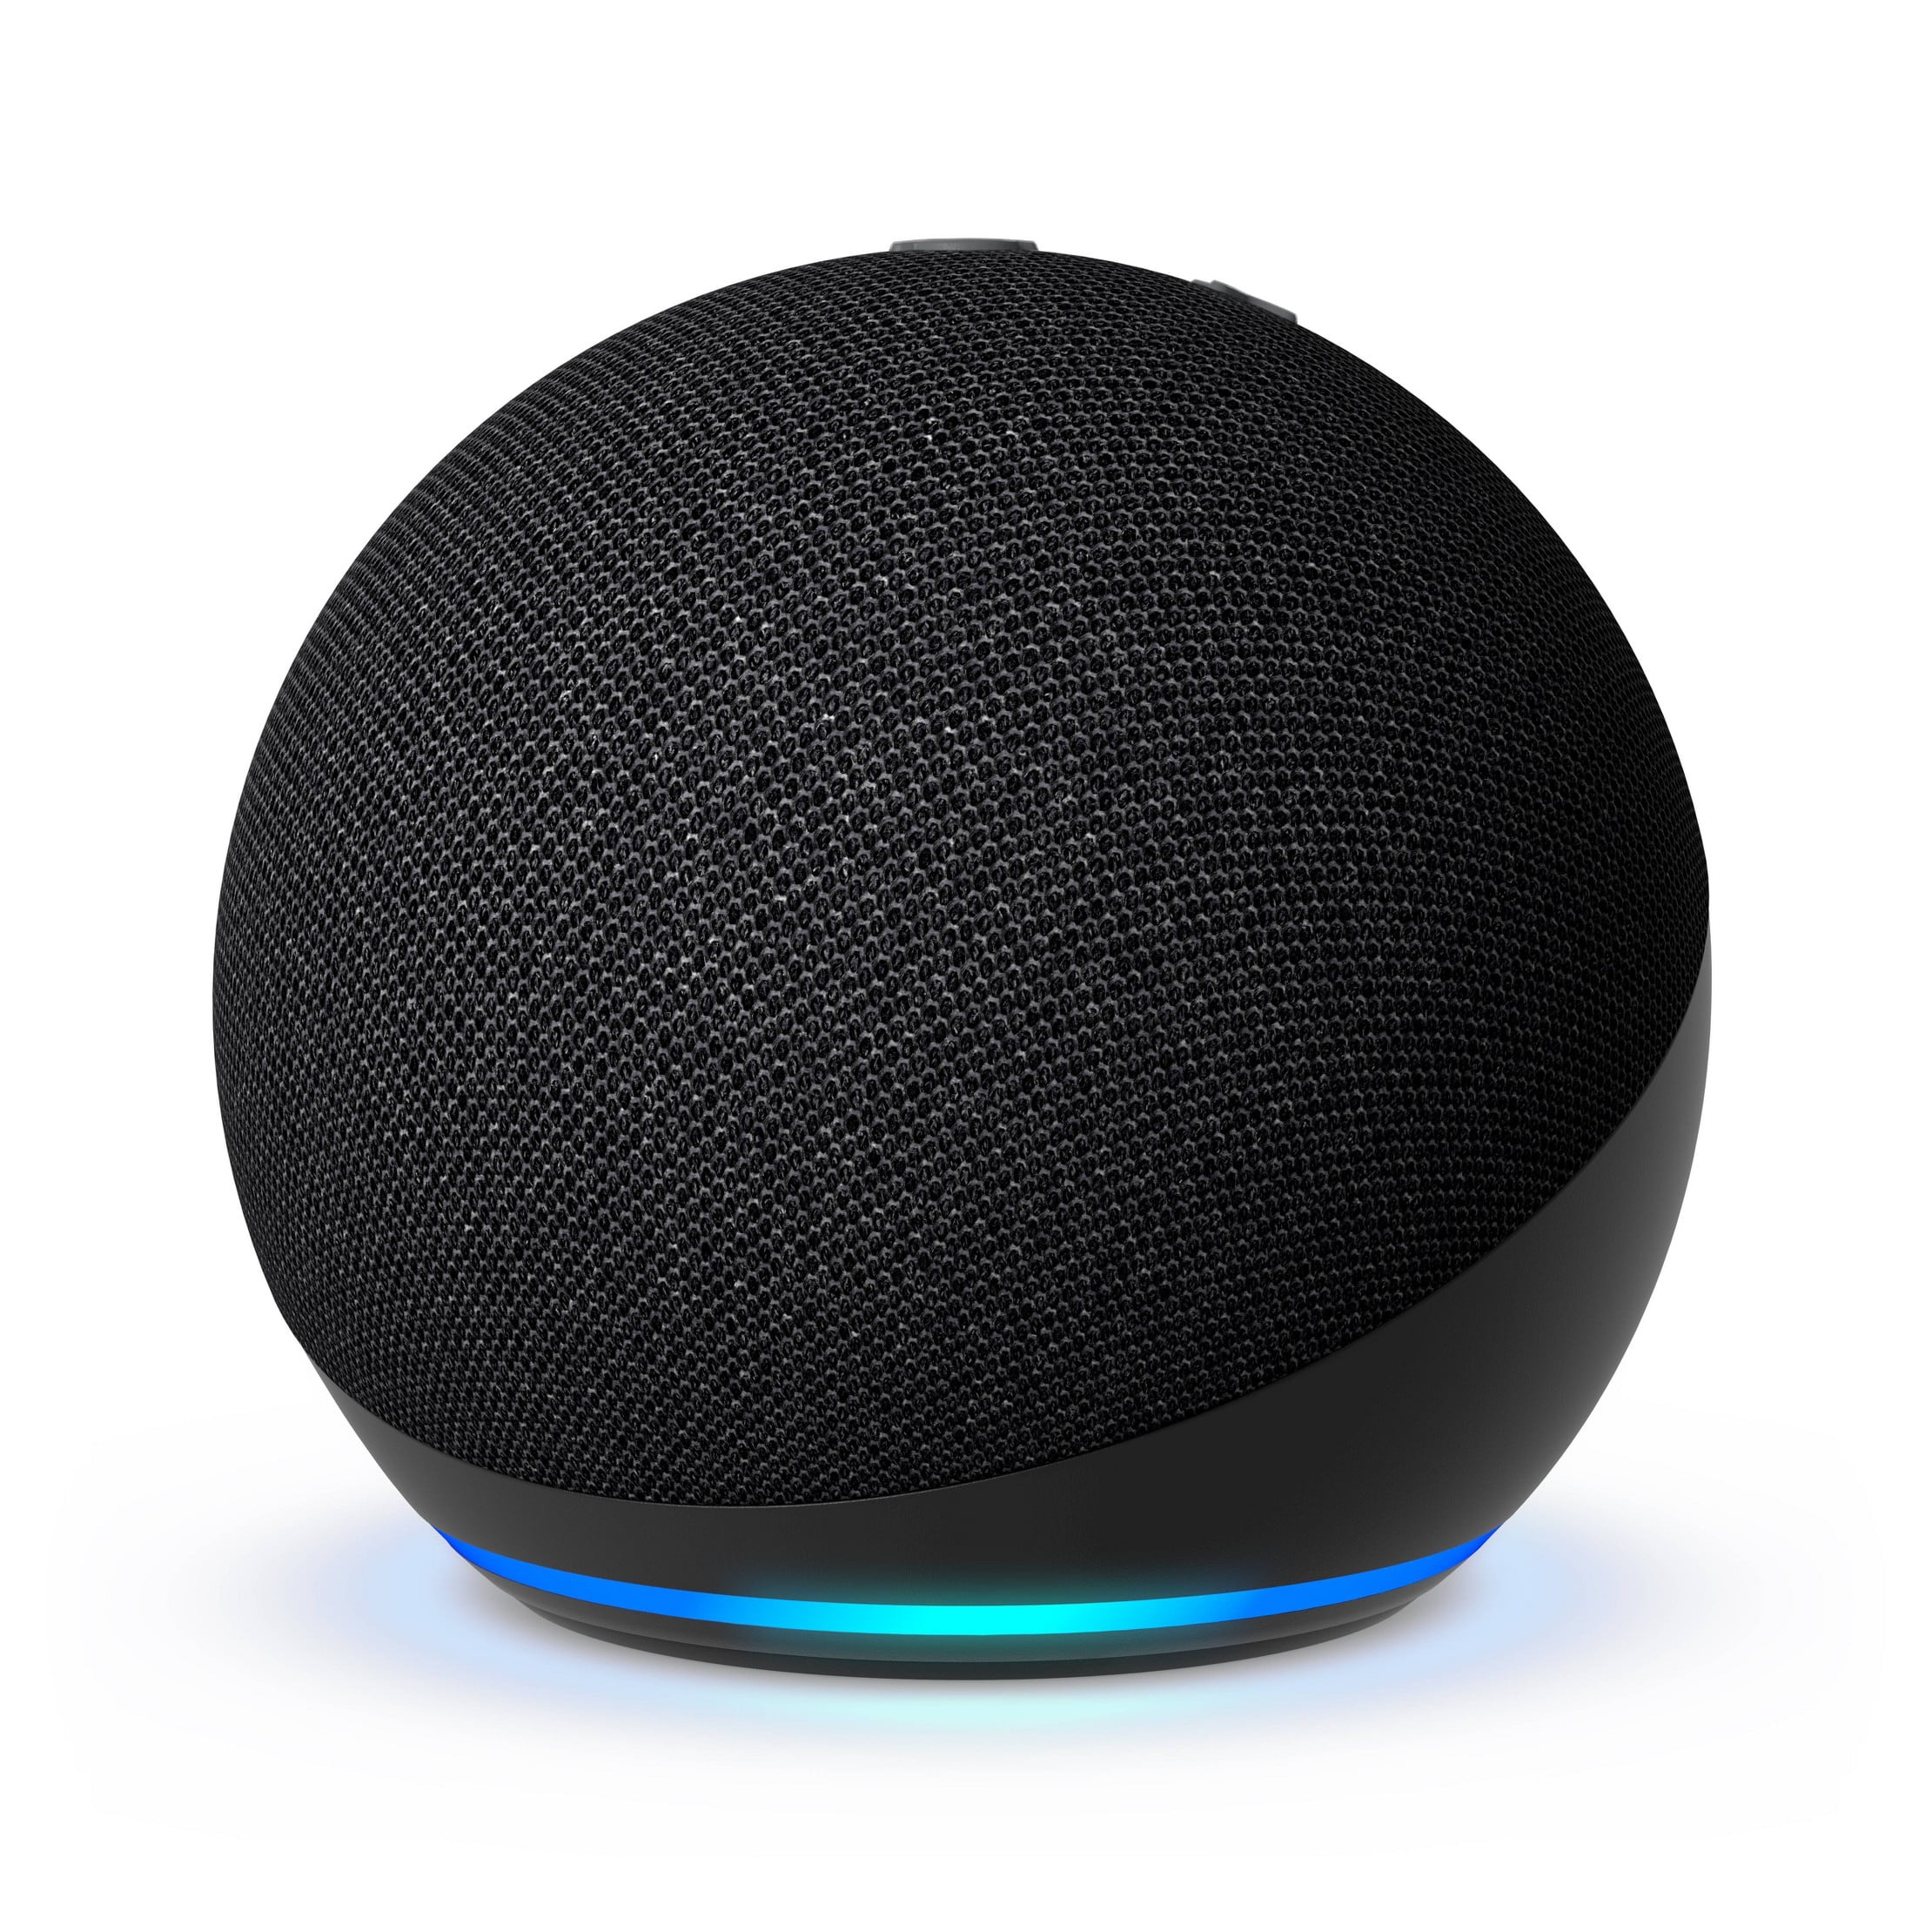 Ourfriday   Echo Dot 5th Generation - Glacier White